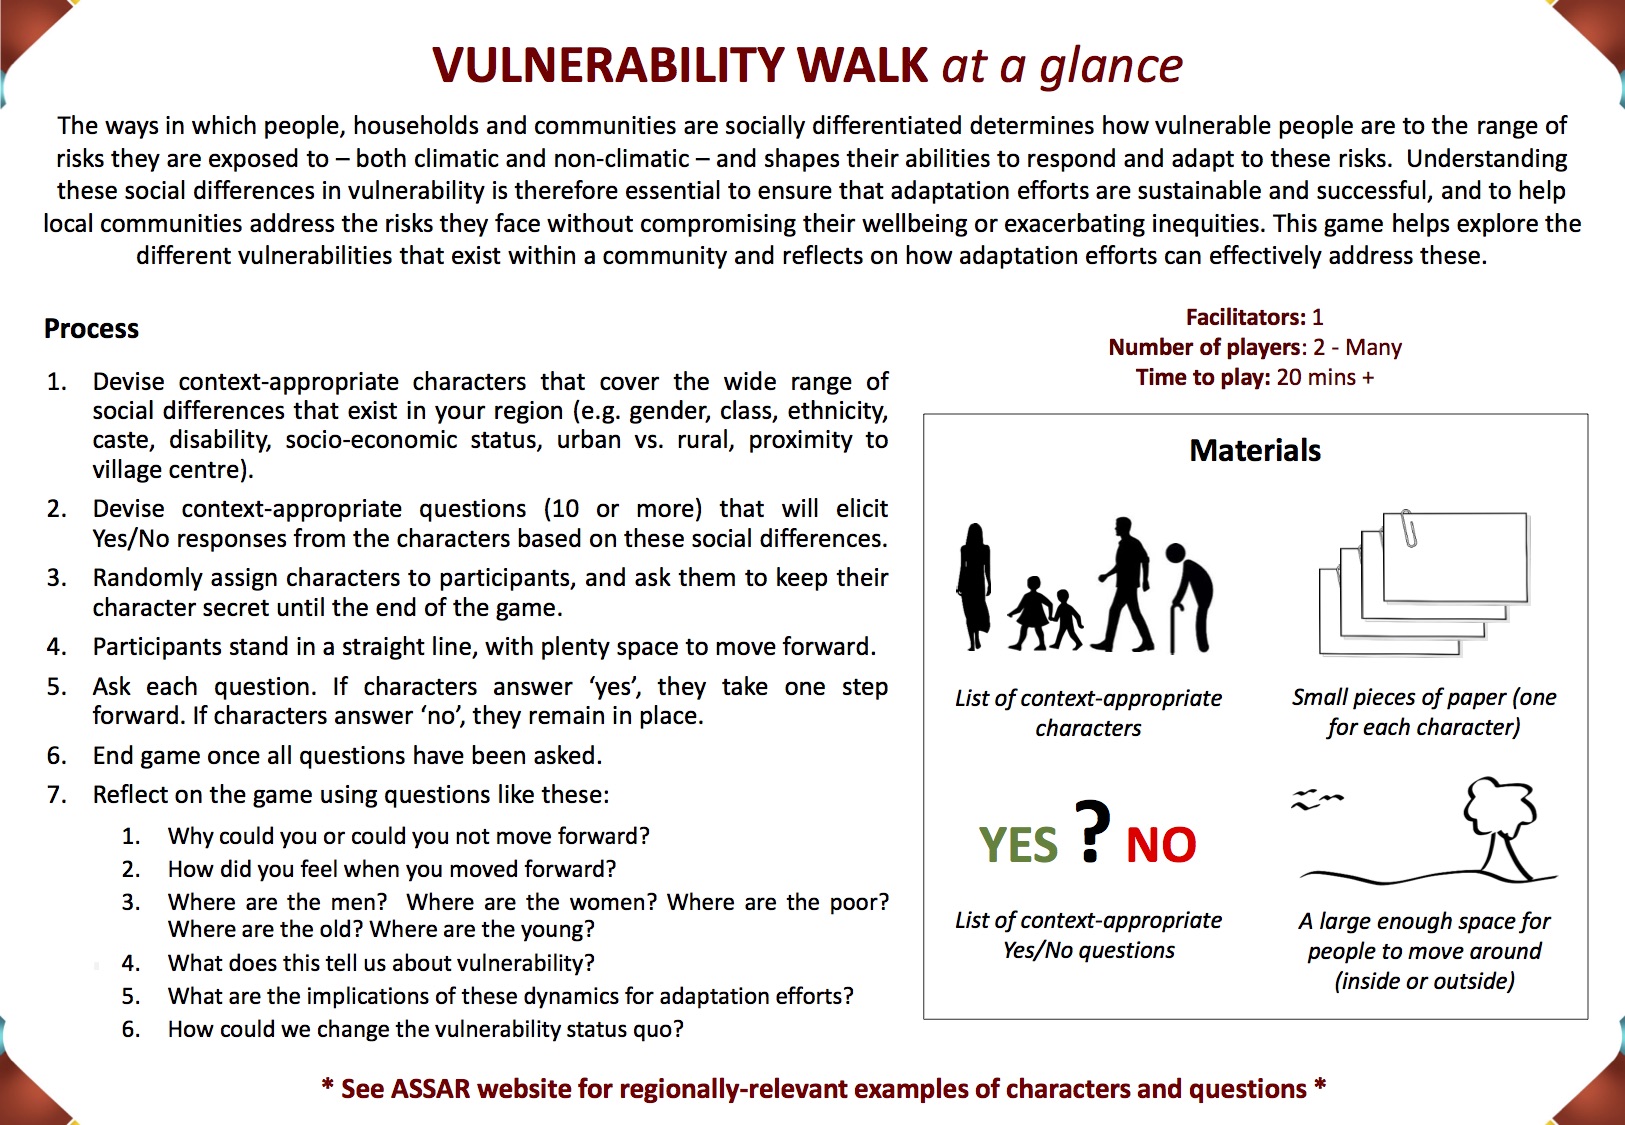 The vulnerability Walk - at a glance